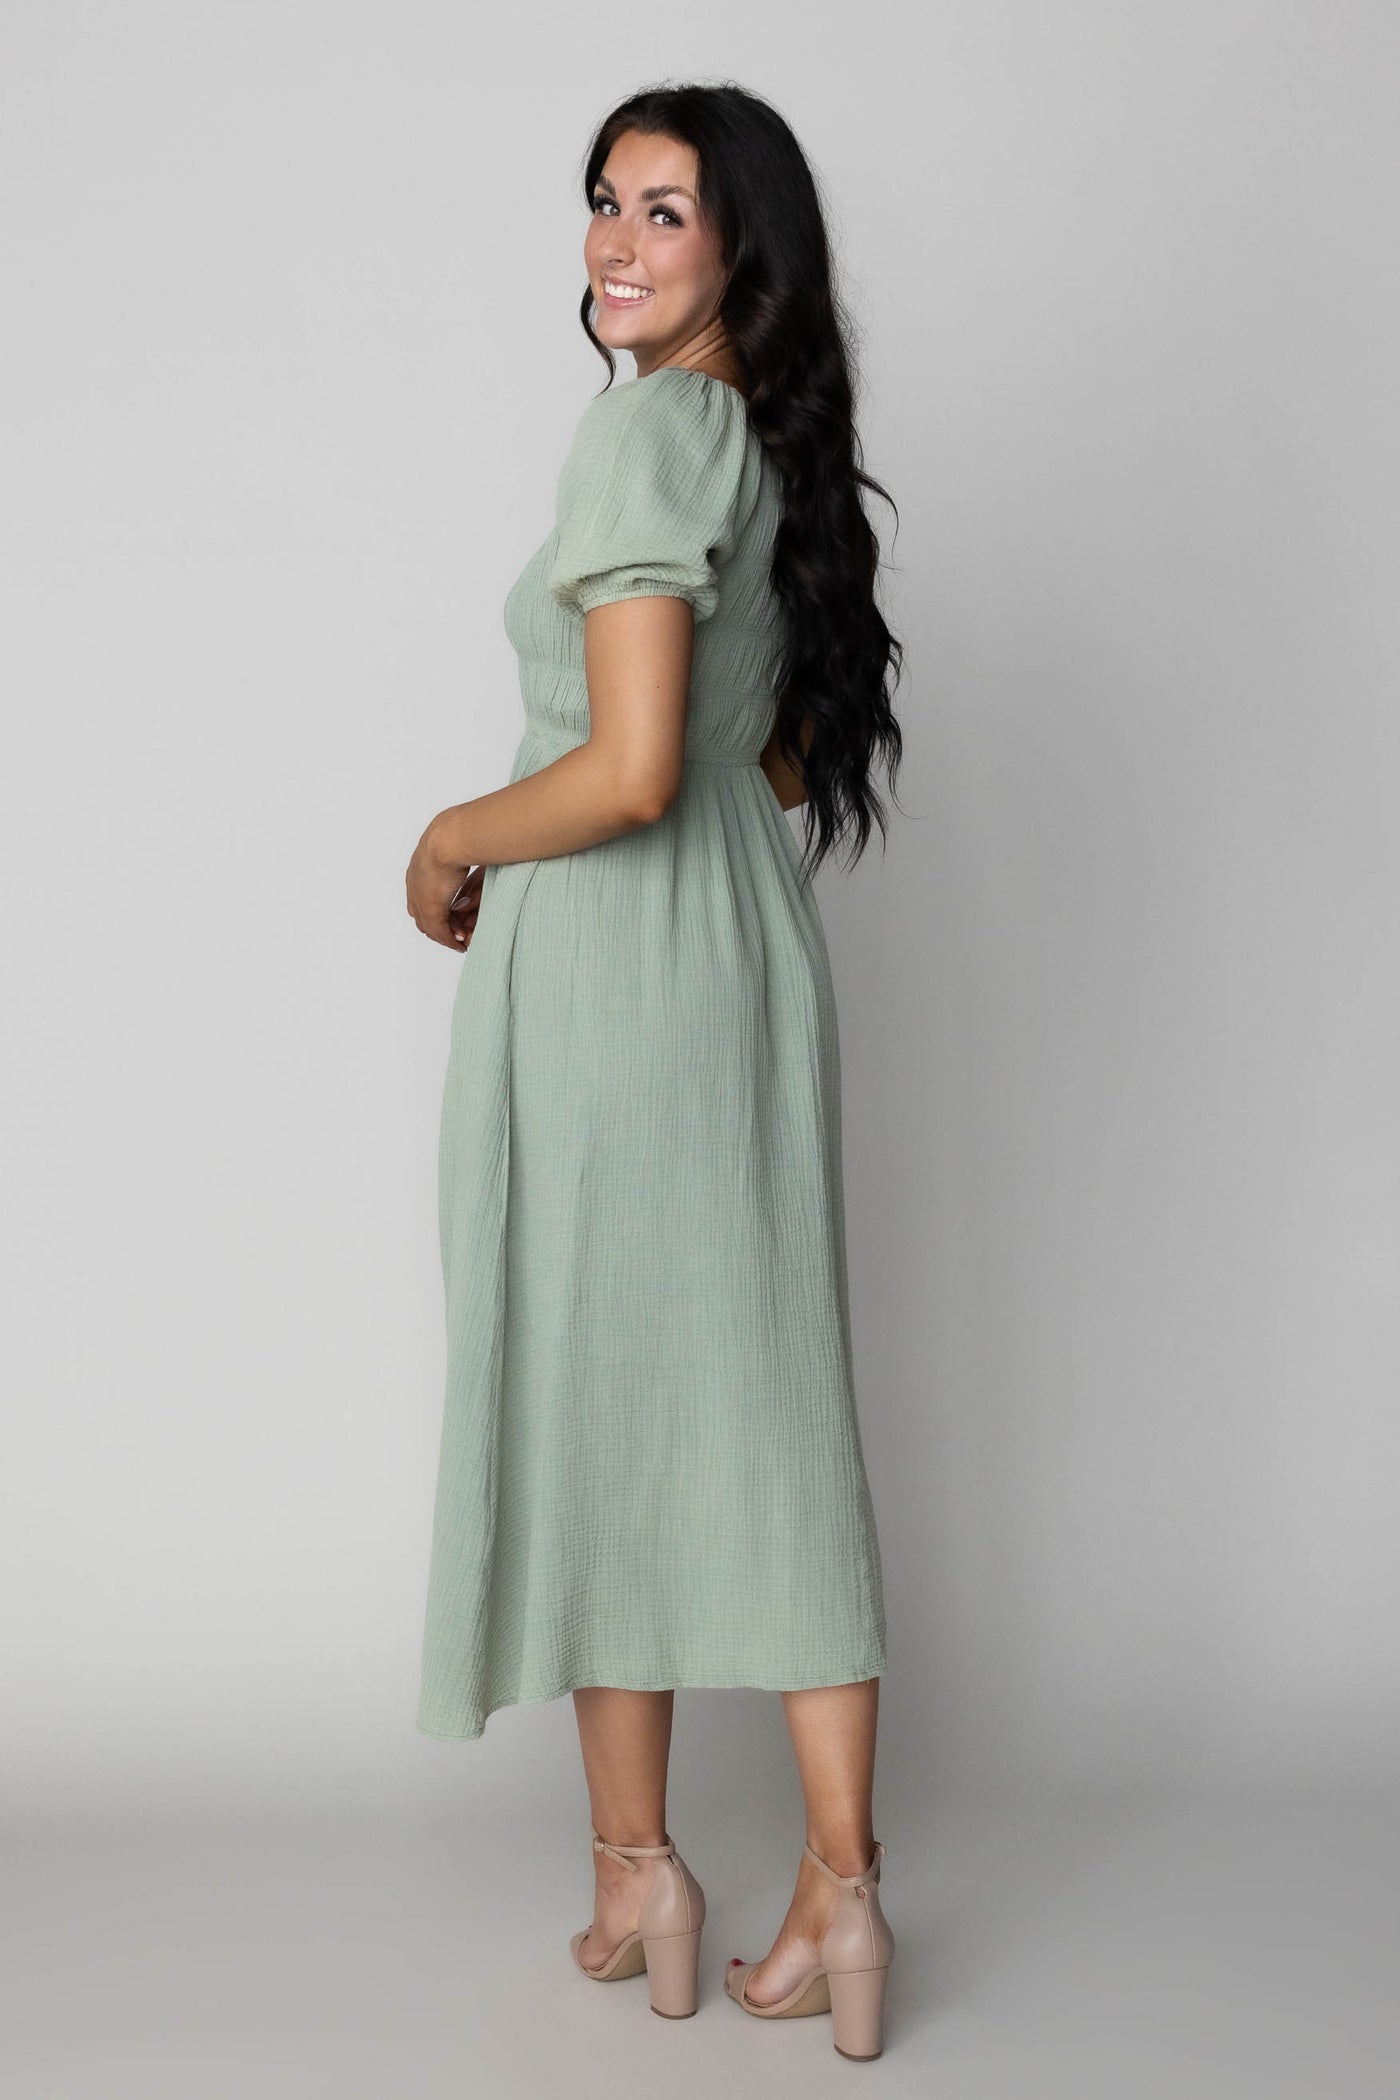 This modest bridesmaid dress has  a smocked bodice and is sage green.